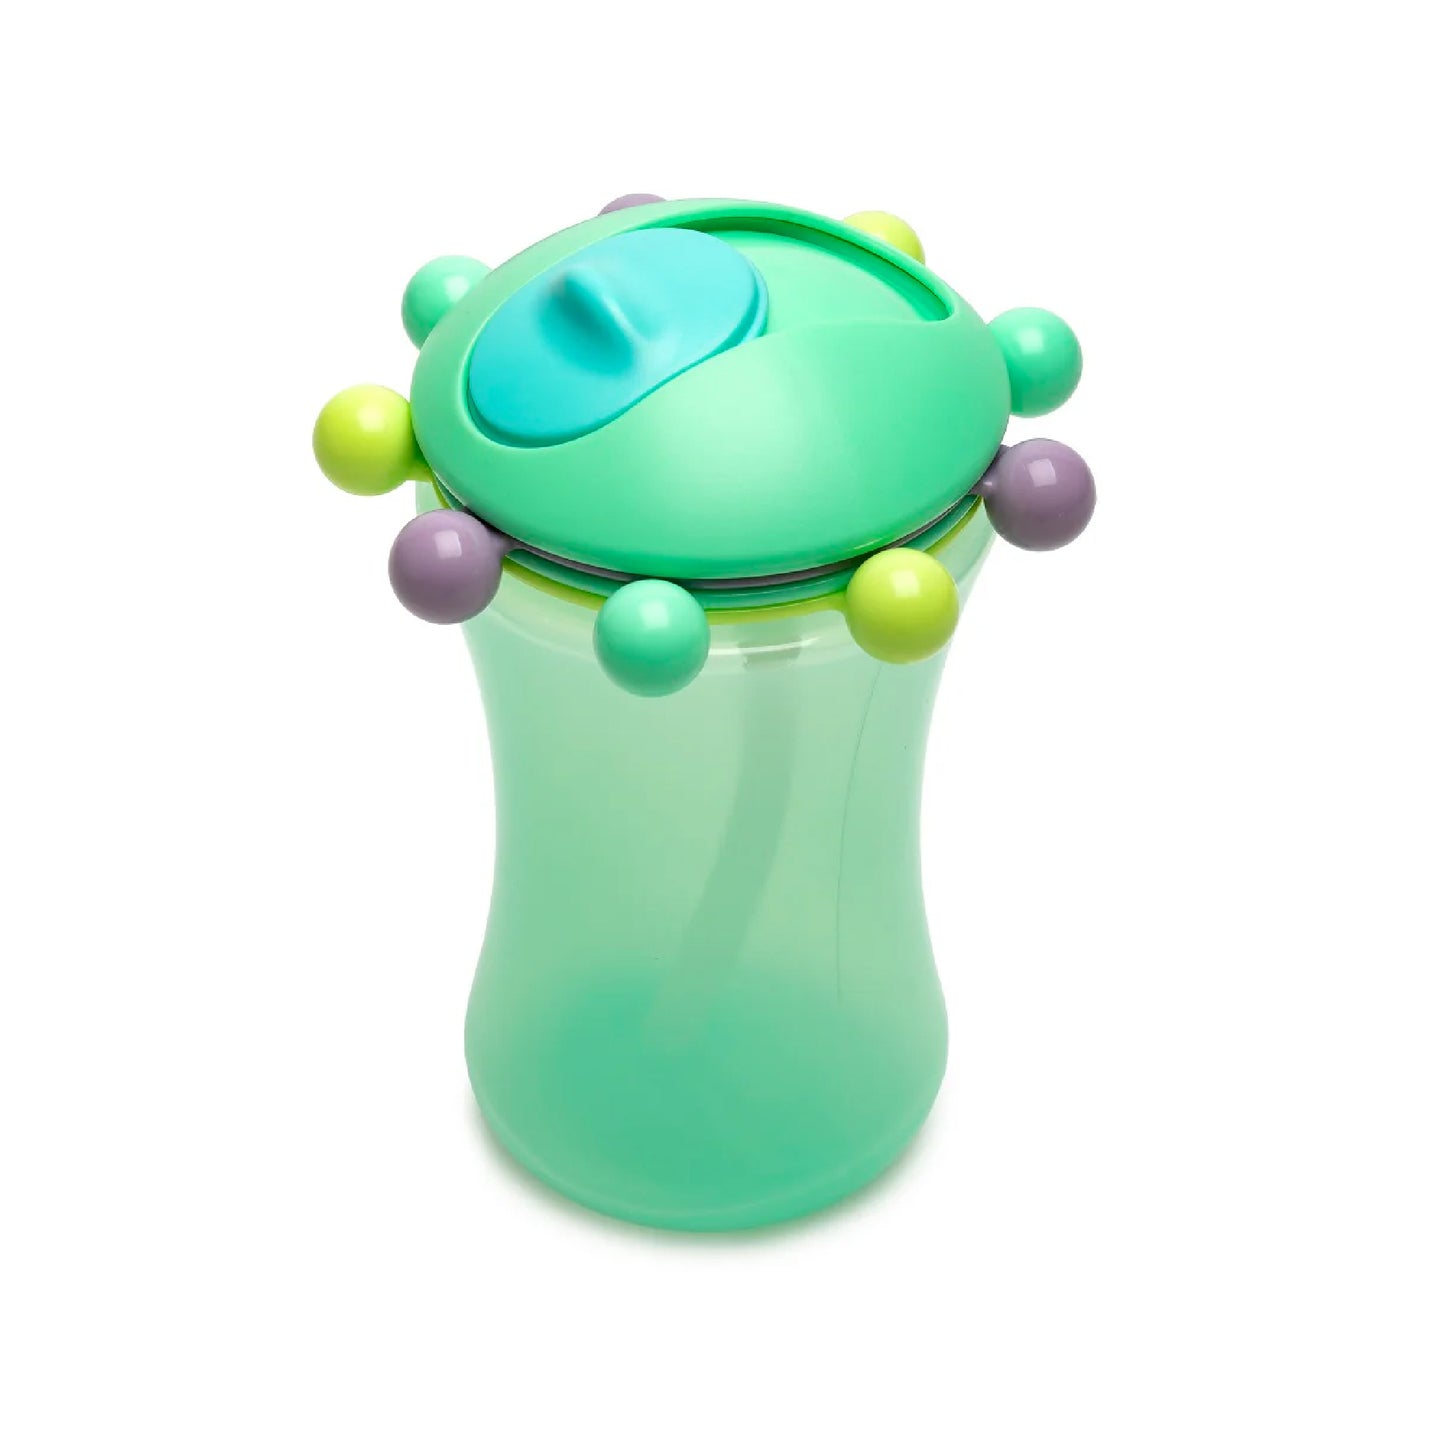 Melii Spin Sippy Cup Mint - Fun & Educational Transition Straw Bottle for Babies, Toddlers, Kids - Spill Proof, Easy to Hold, BPA-Free,  Ideal for On-the-Go Hydration